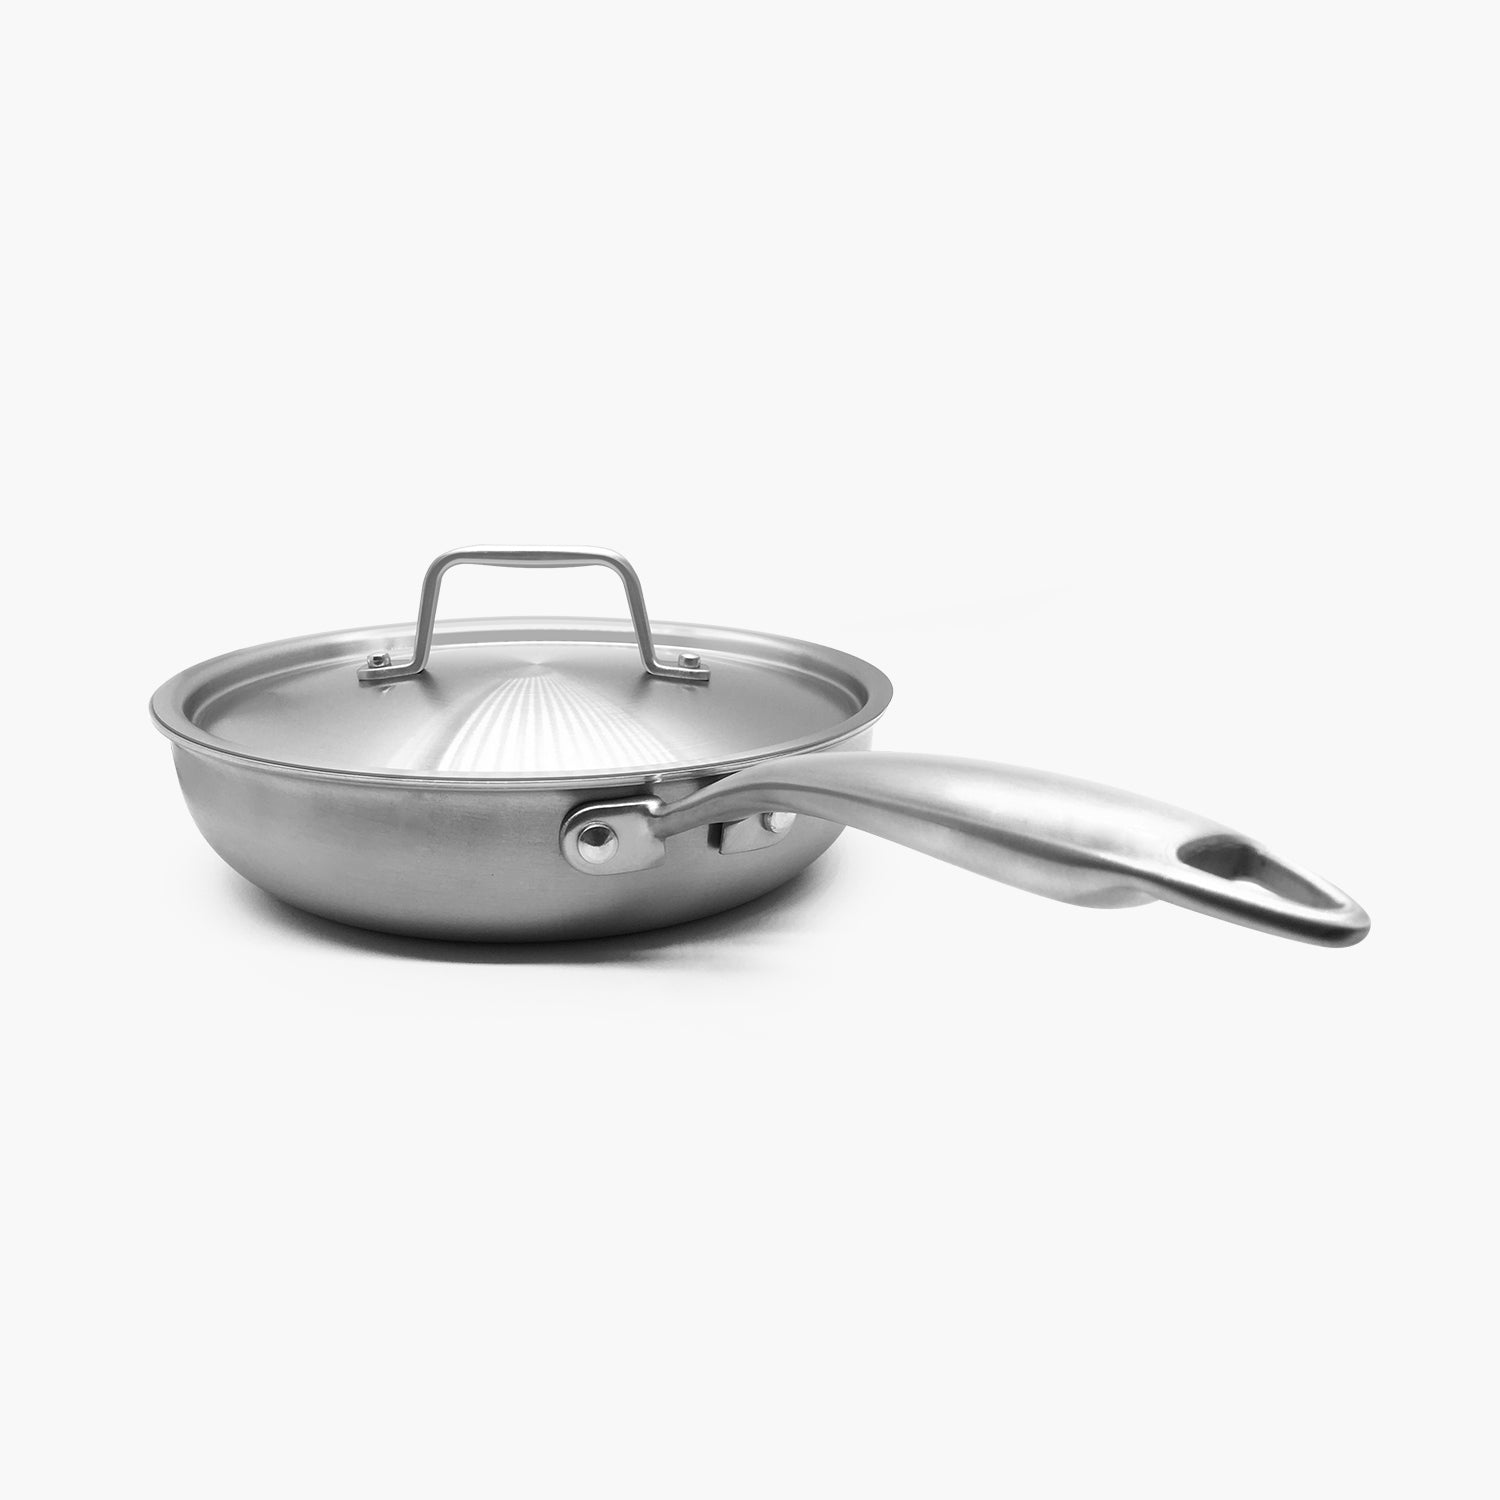 Fortune Candy 1.6-Quart Saucepan with Lid, Tri-Ply, 18/10 Stainless Steel,  Comfortable Grip & Advanced Welding Technology, Dishwasher Safe, Induction  Ready, Mirror Finish, Silver